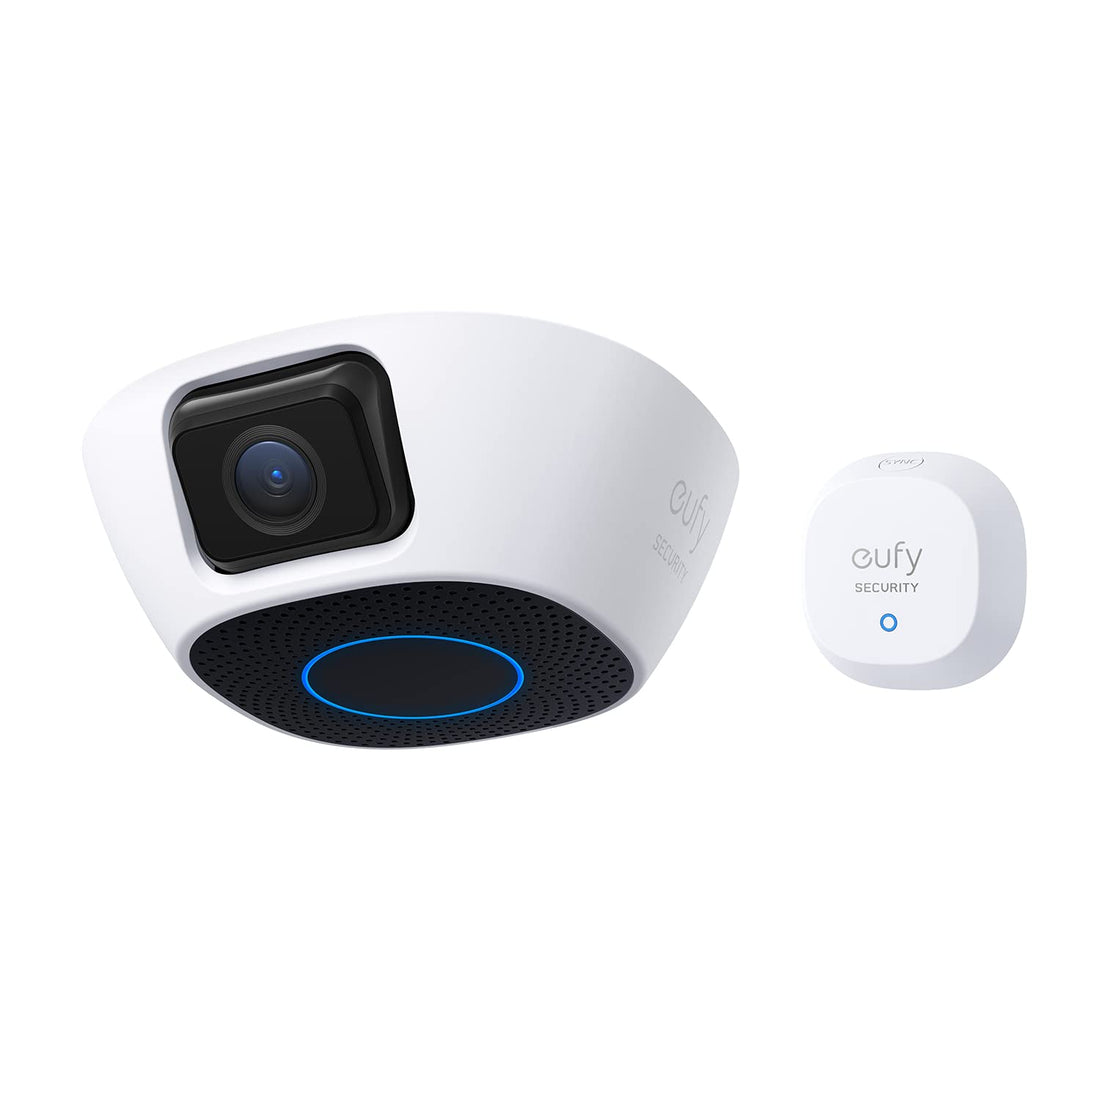 eufy Security Smart Garage-Control Cam E110 with Sensor, Detects Open/Close Status, Real-Time Notifications, 2K, No Monthly Fee, AI Human Detection, 2.4GHz Wi-Fi only